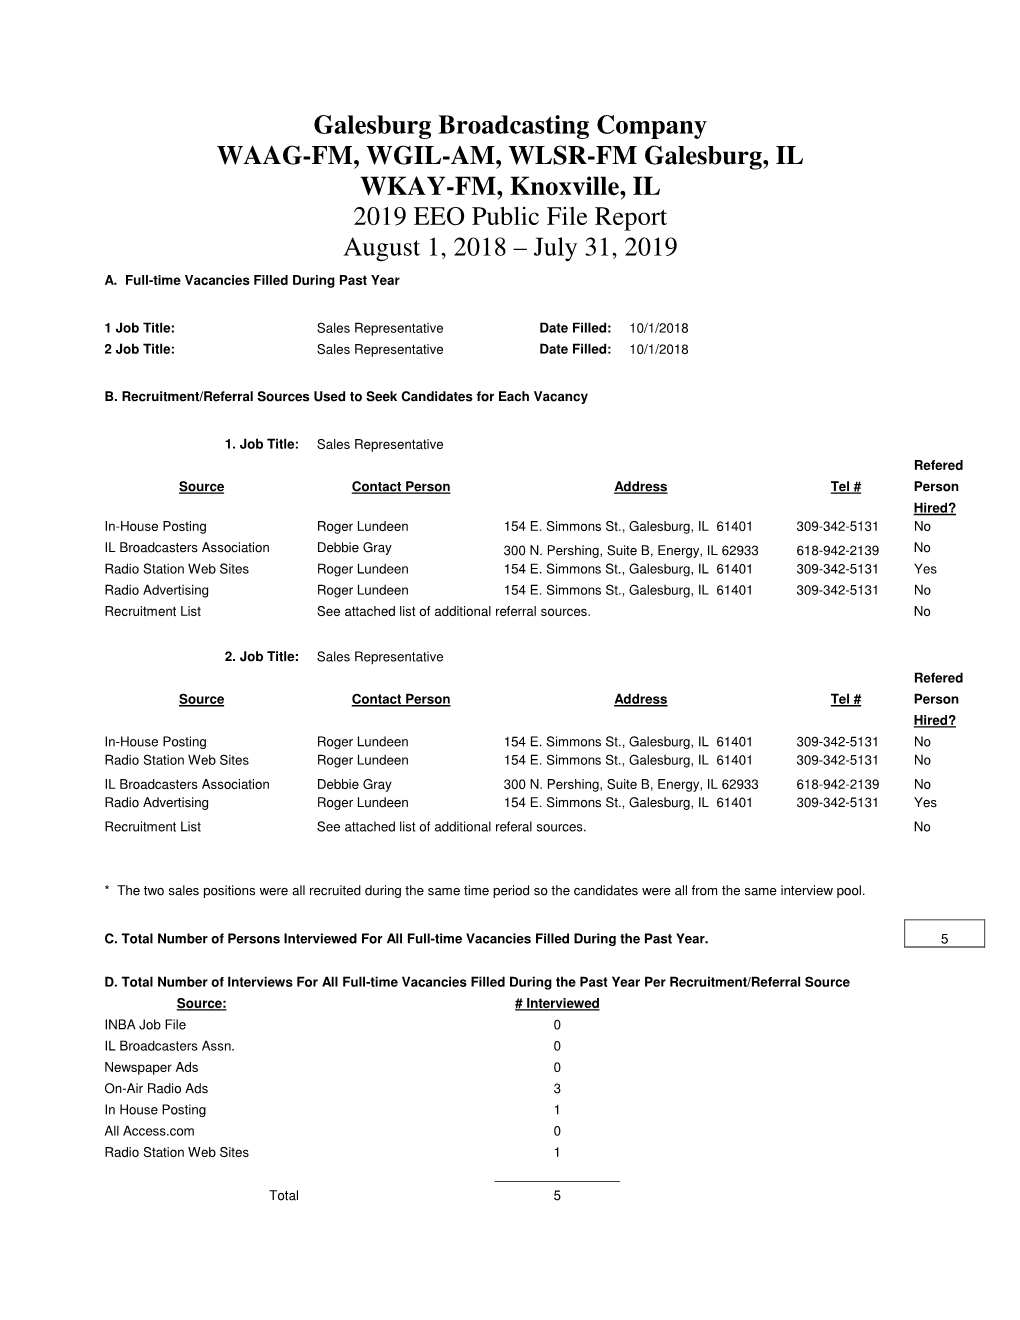 Galesburg Broadcasting Company WAAG-FM, WGIL-AM, WLSR-FM Galesburg, IL WKAY-FM, Knoxville, IL 2019 EEO Public File Report August 1, 2018 – July 31, 2019 A